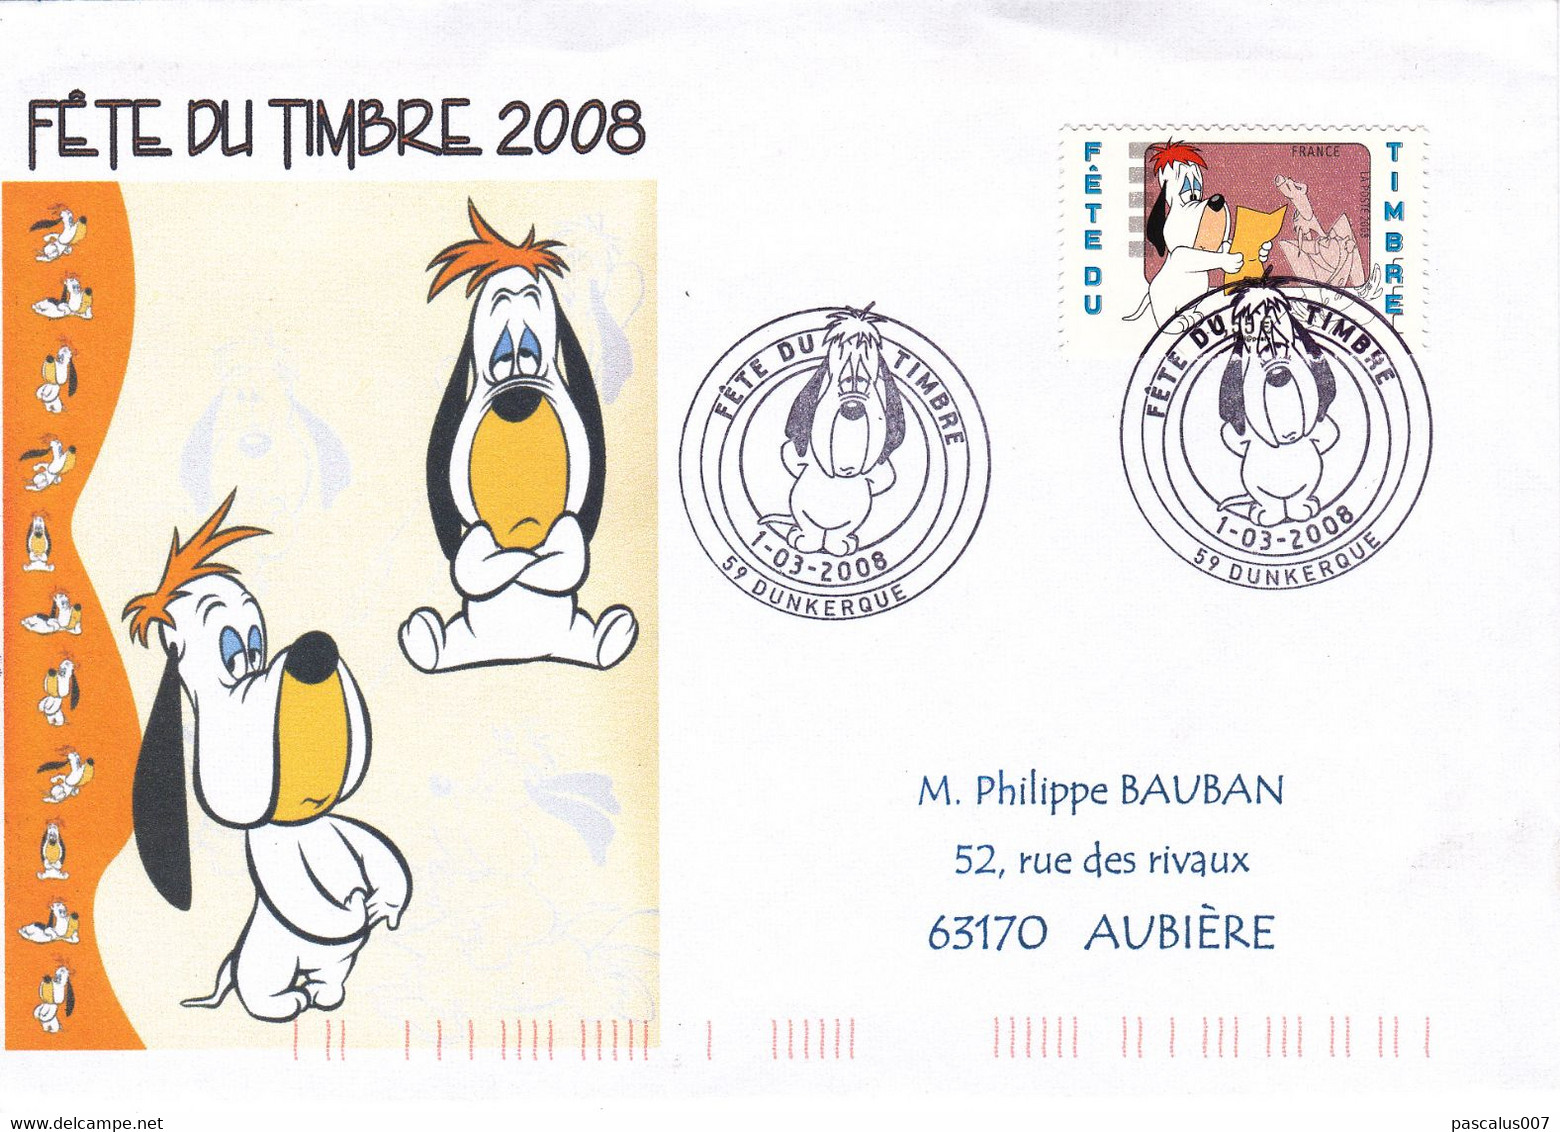 B01-290 France PTT 4146  BD Rare Droopy Tex Avery Fête Du Timbre FDC 01-03-2008 59 Dunkerque - Collectors